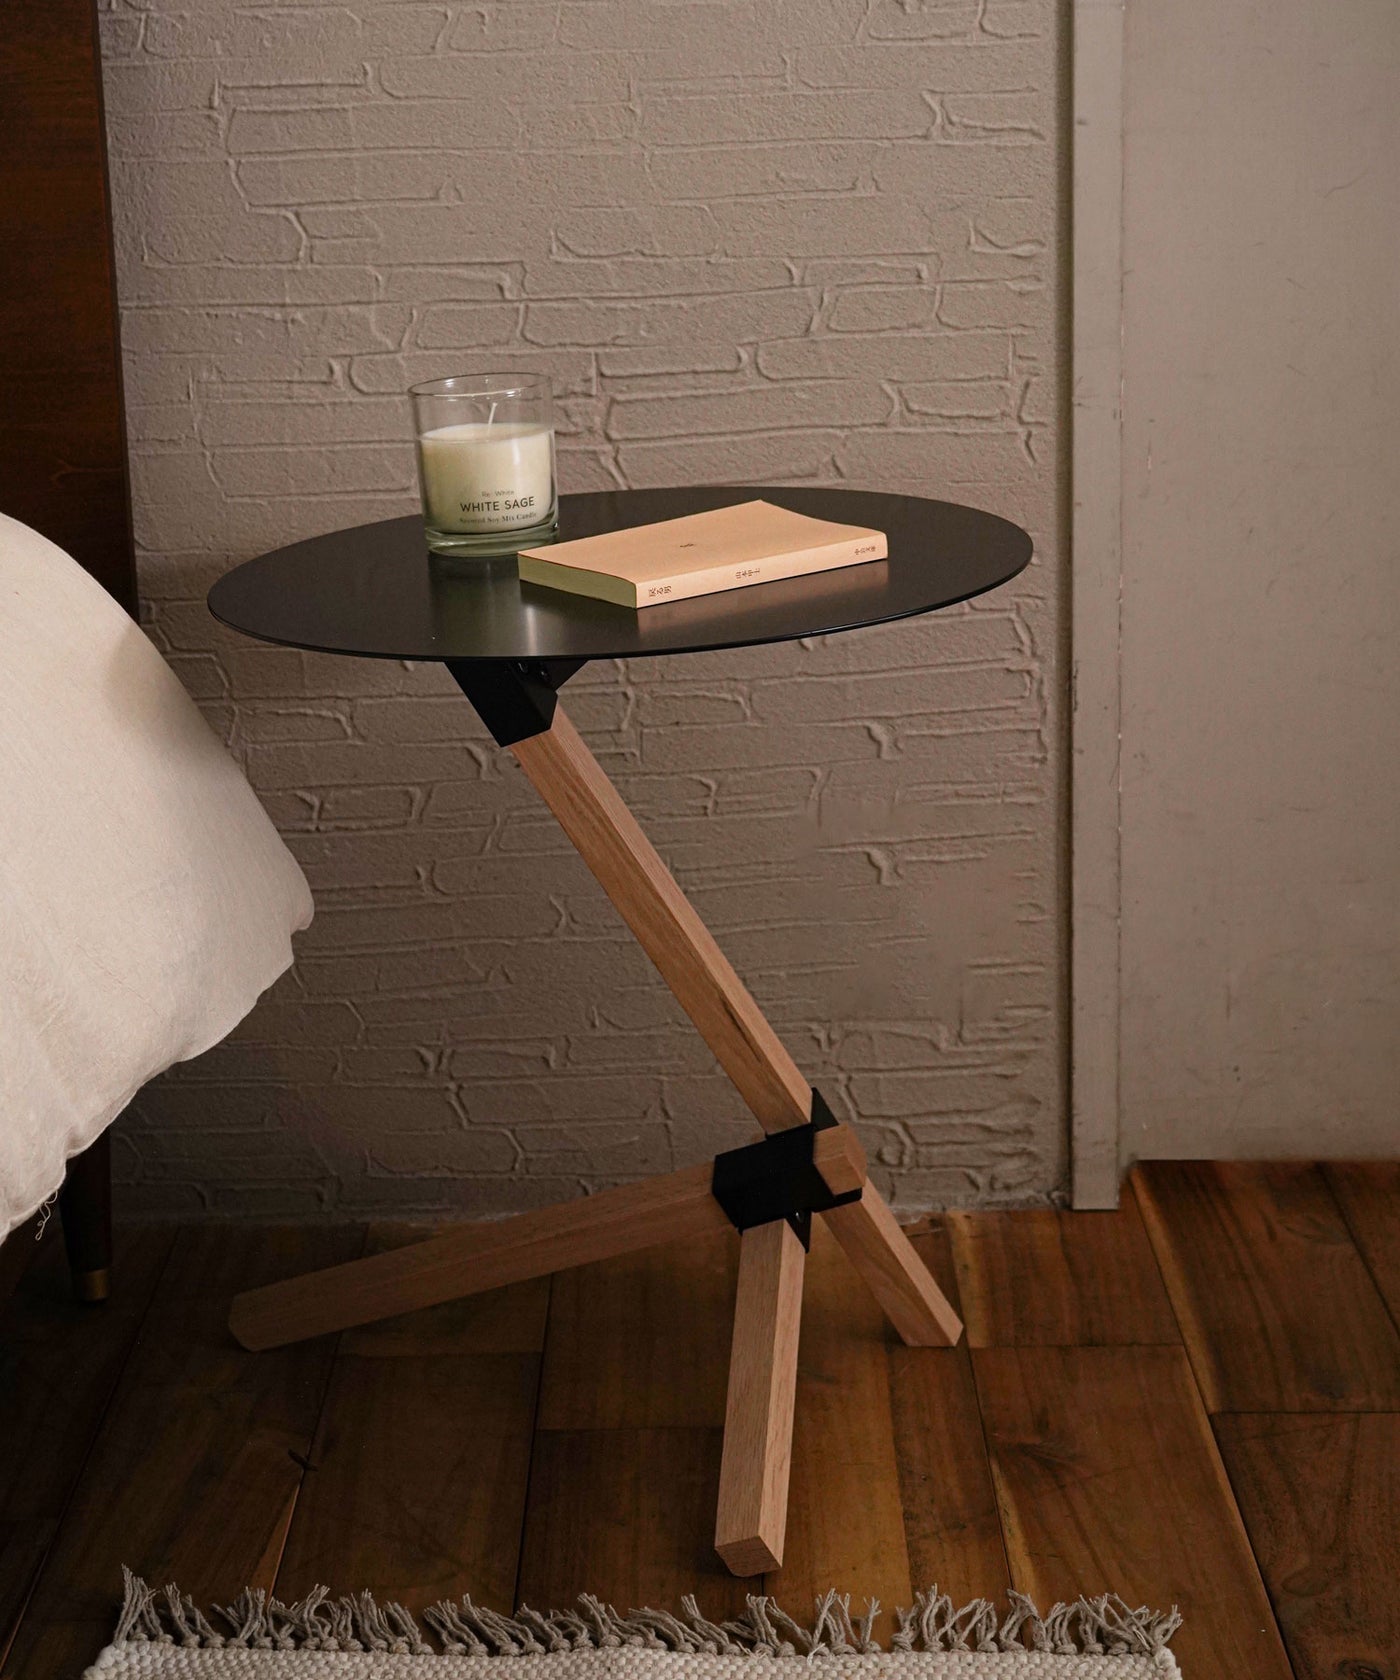 【DUENDE（デュエンデ）】TRE SIDE TABLE